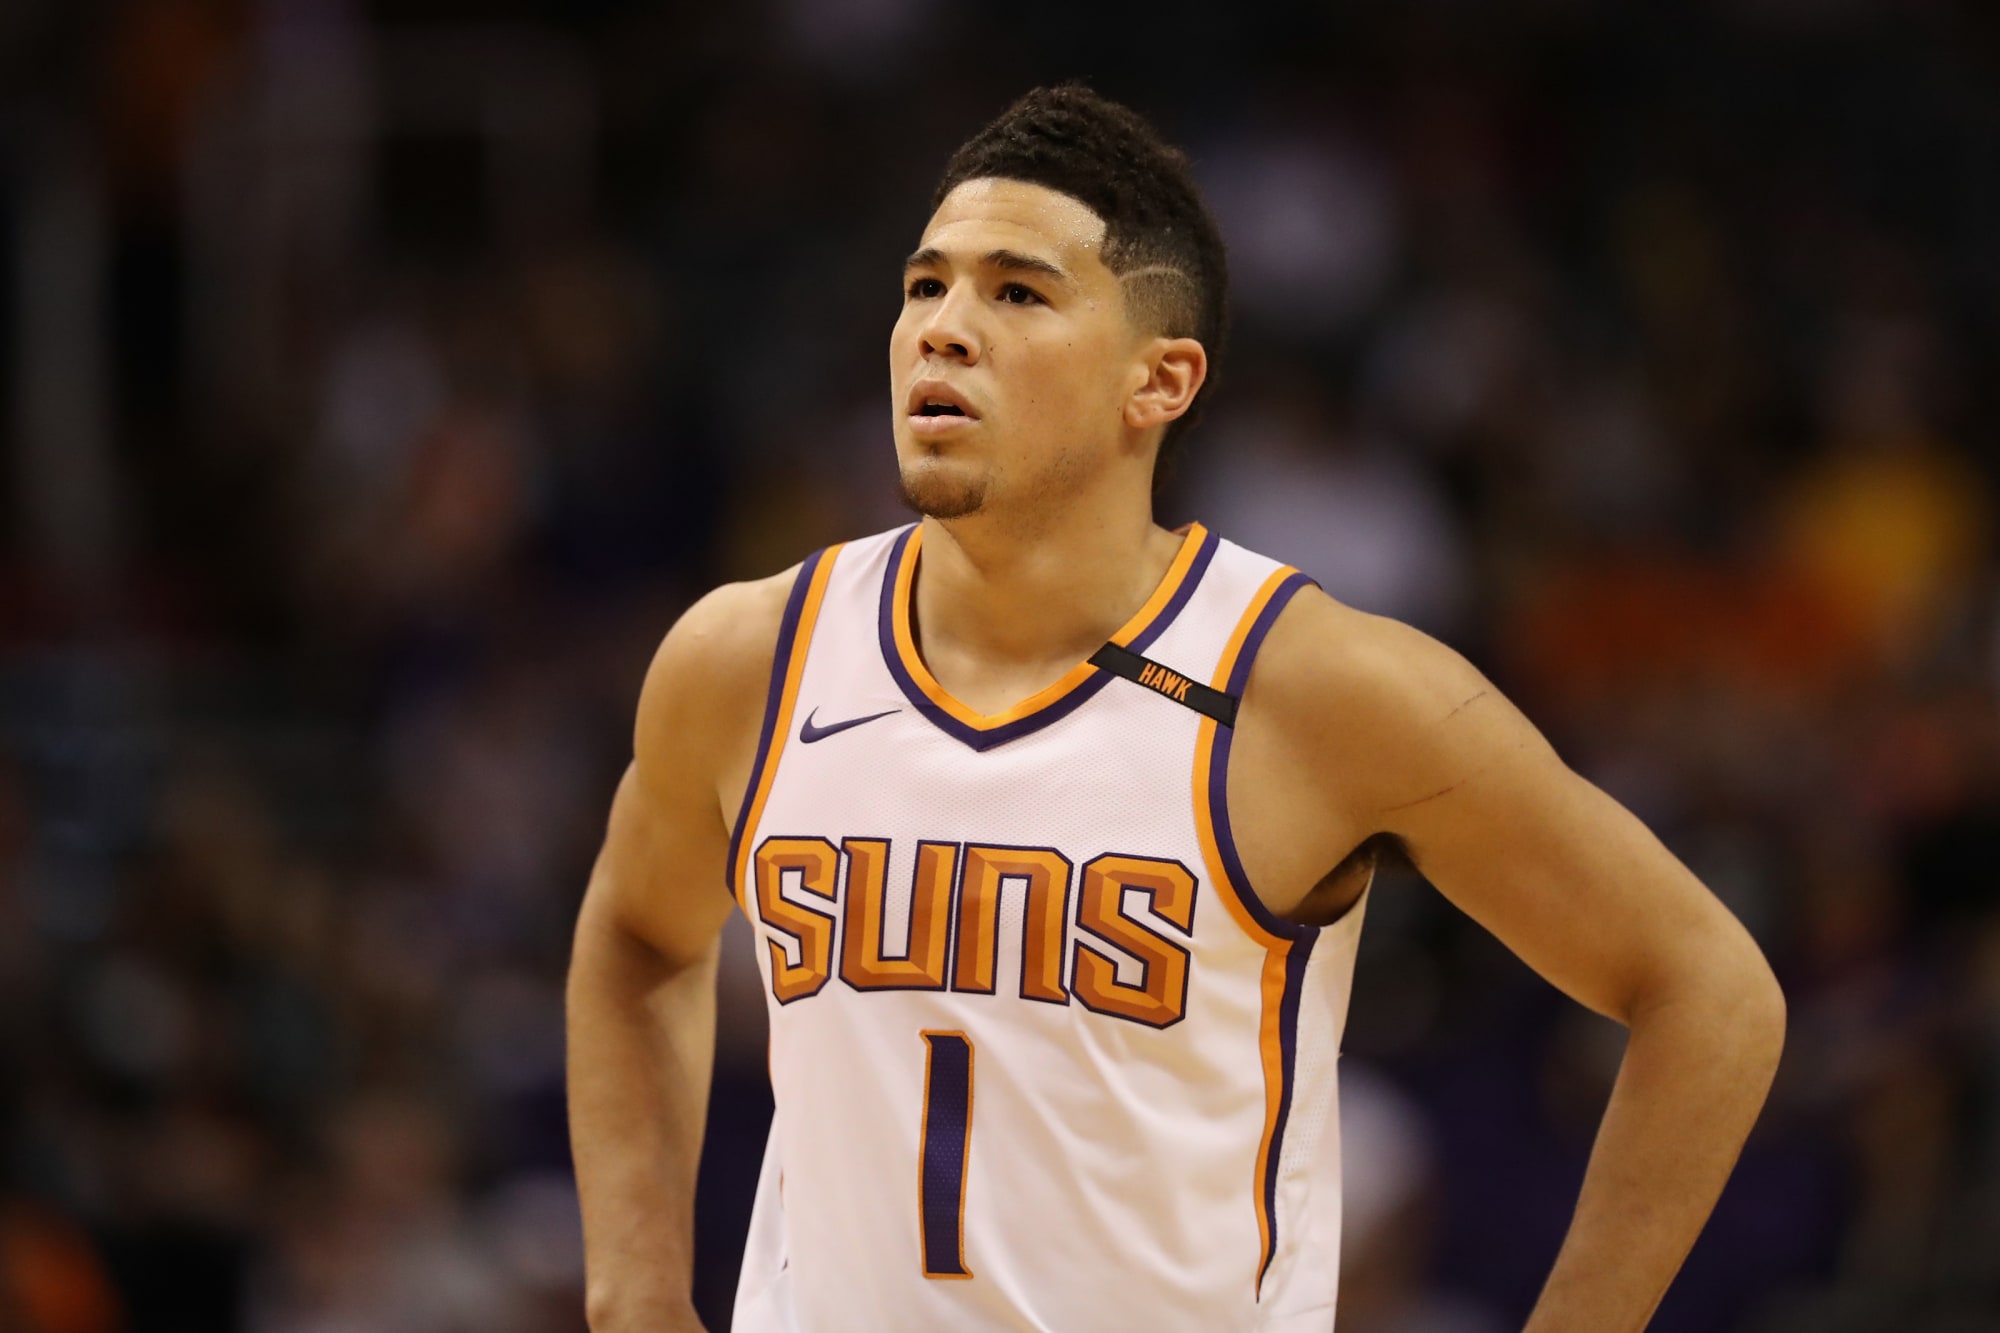 Phoenix Suns: Devin Booker out "Indefinitely" Following Hand Surgery